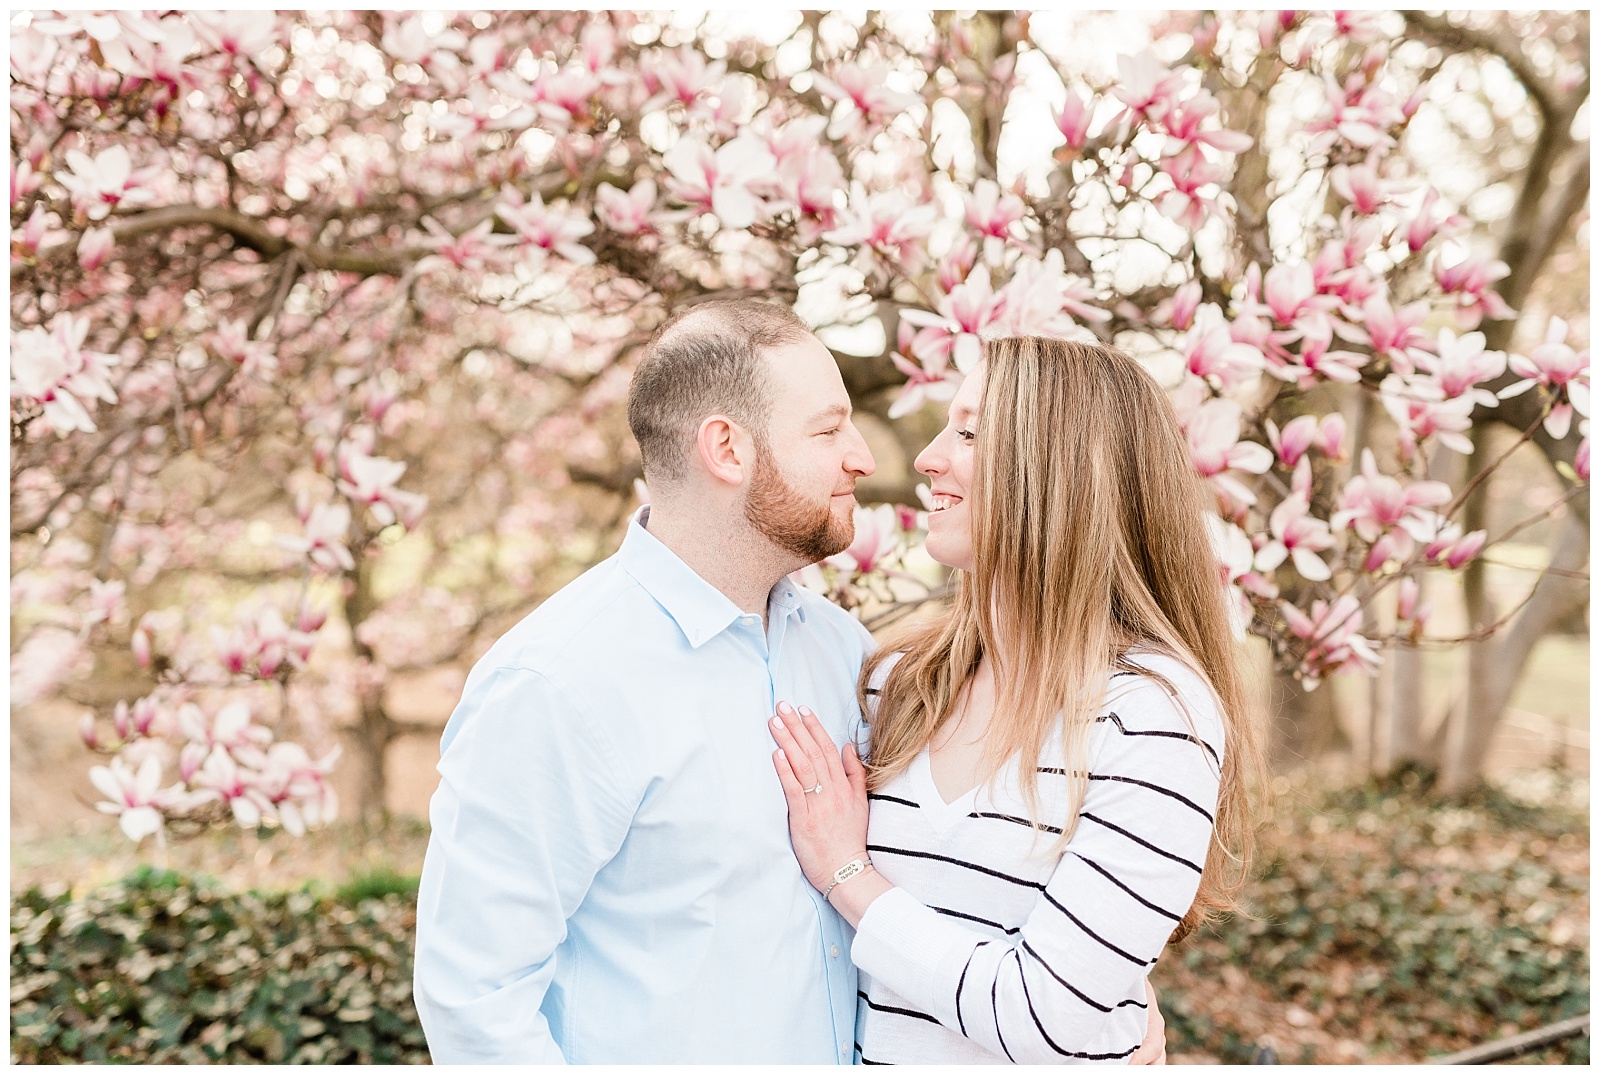 Central Park, NYC engagement session, springtime, wedding photographer, New York, blooms, pink tree